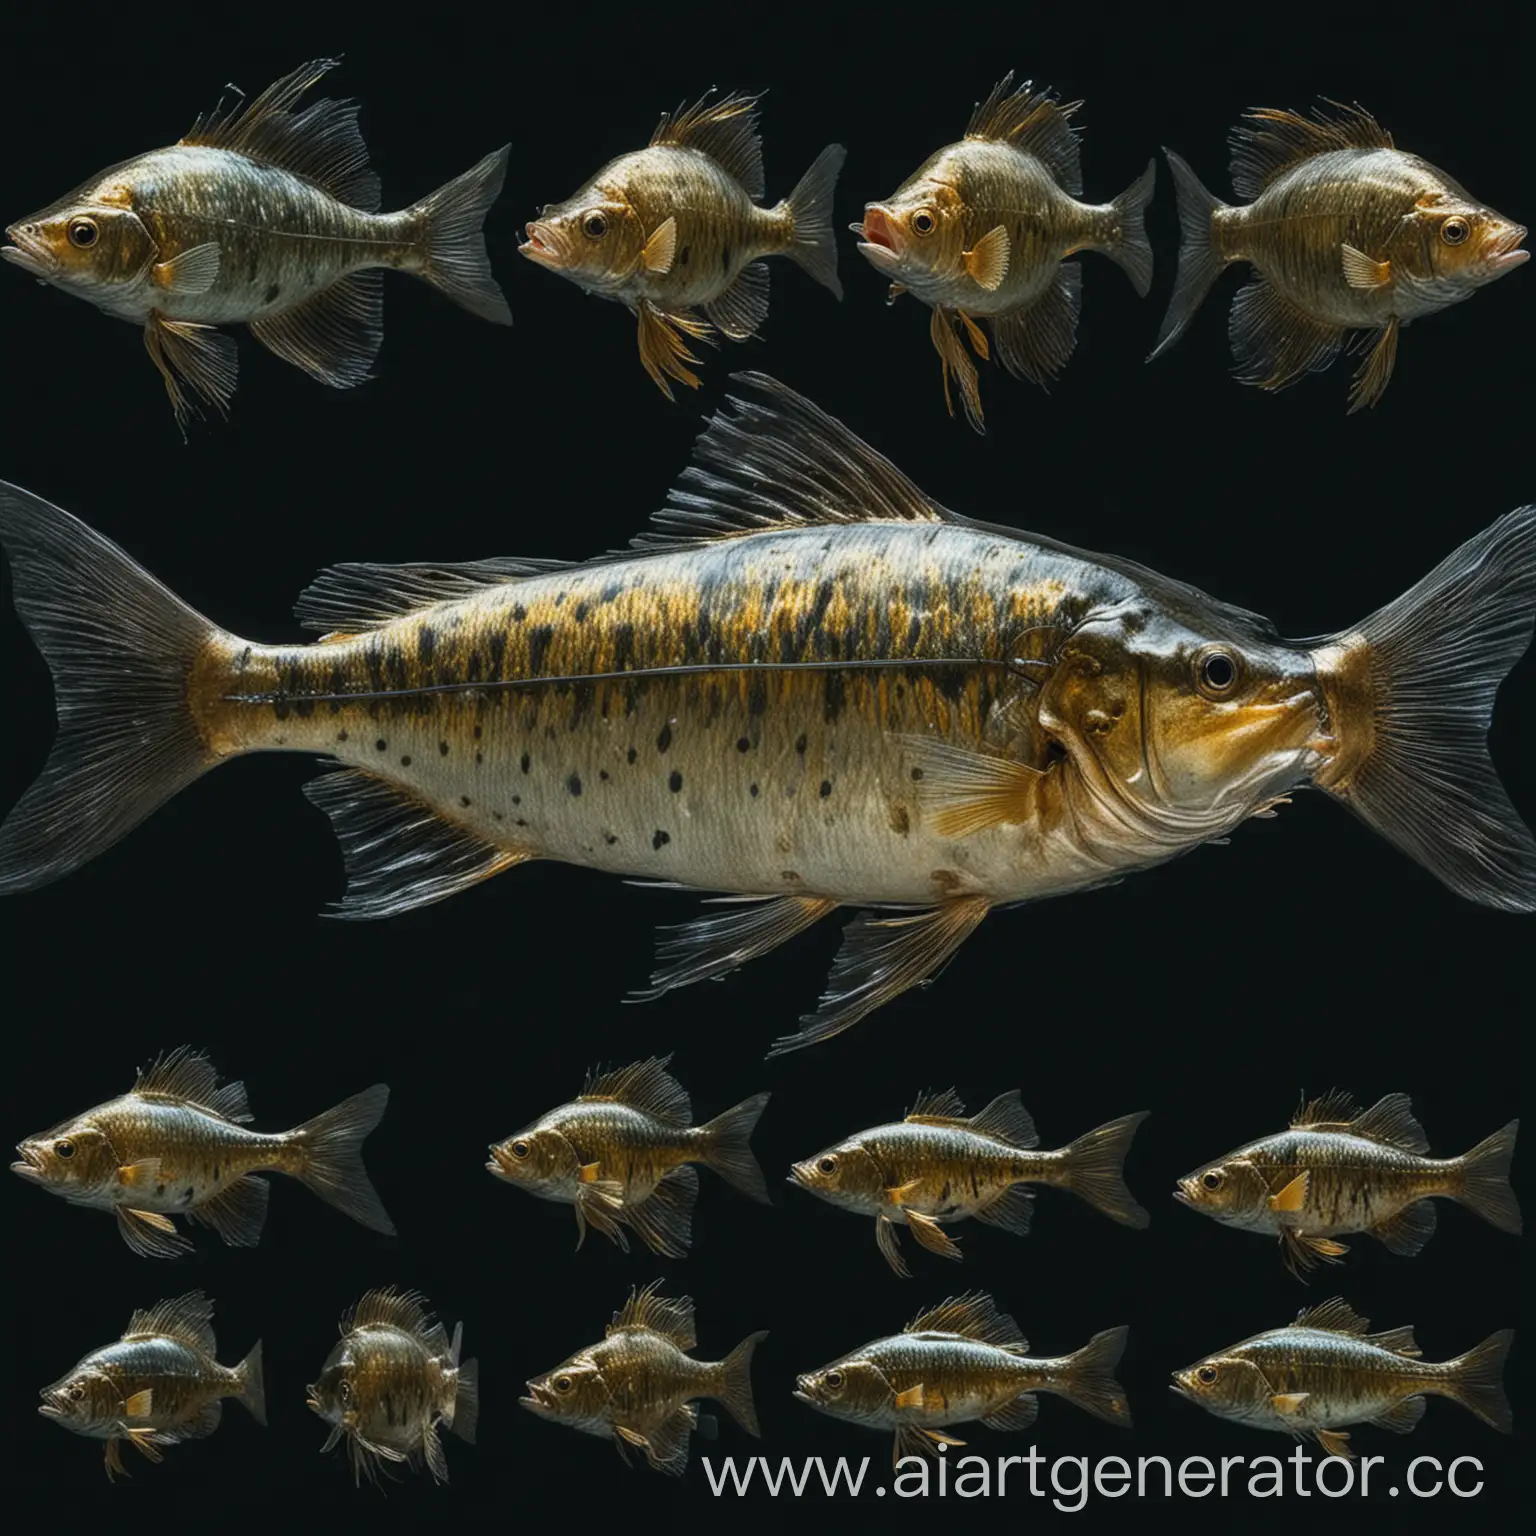 Neural-Network-Interpretation-Fish-from-The-Tale-of-the-Fisherman-and-the-Fish